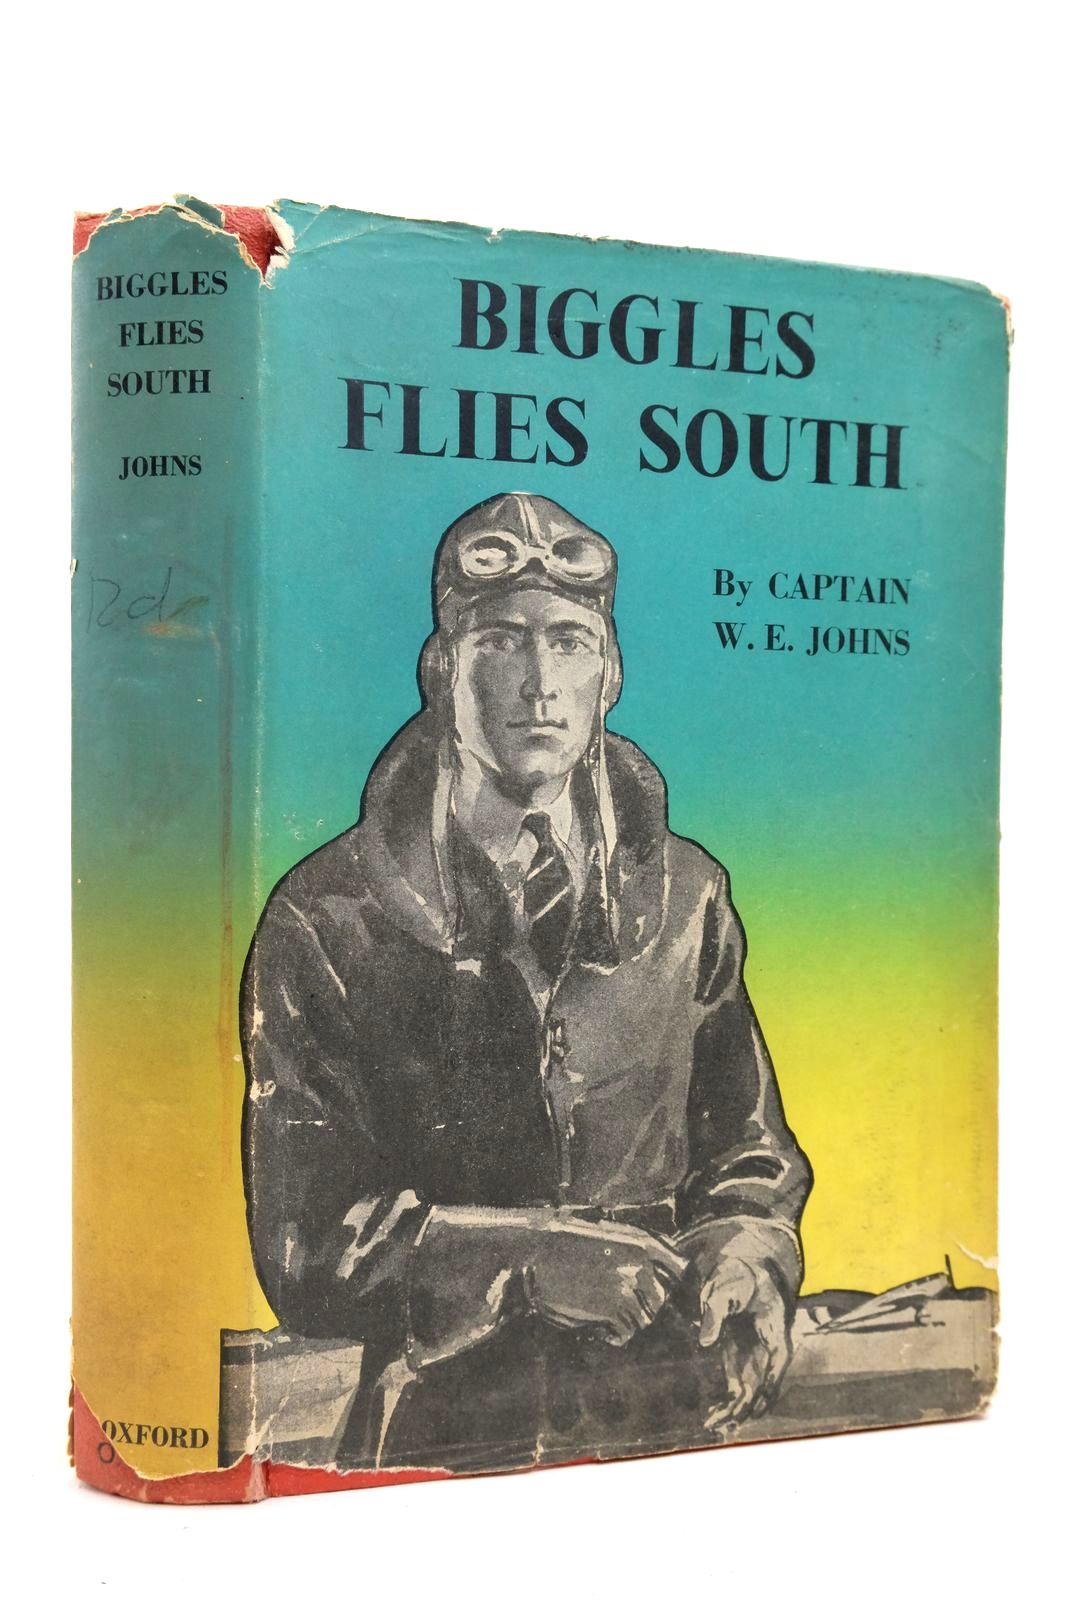 Photo of BIGGLES FLIES SOUTH written by Johns, W.E. illustrated by Nicolle, Jack published by Oxford University Press, Geoffrey Cumberlege (STOCK CODE: 2139721)  for sale by Stella & Rose's Books